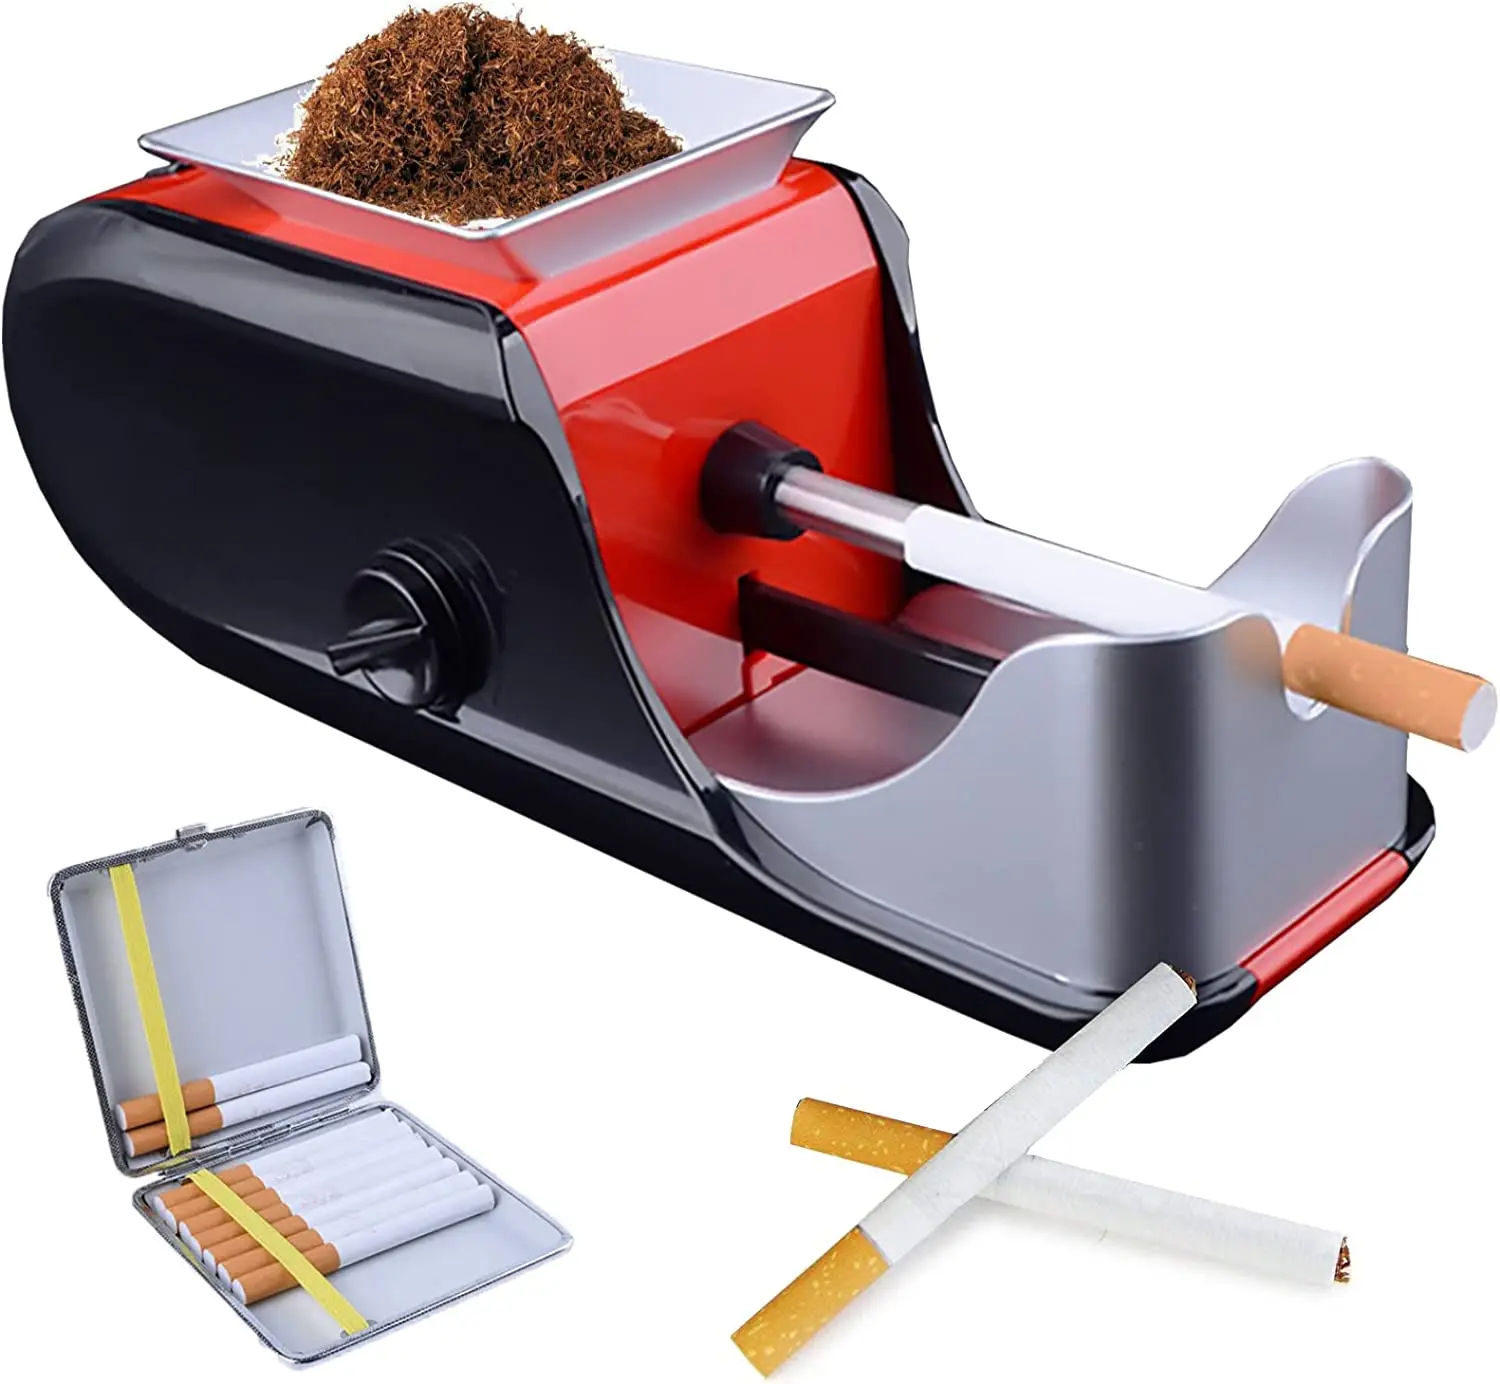 Cigarette Filling Machine Fully Automatic Cigarette Plug, Electric Smoking Accessories with Charger and Cleaning Brush